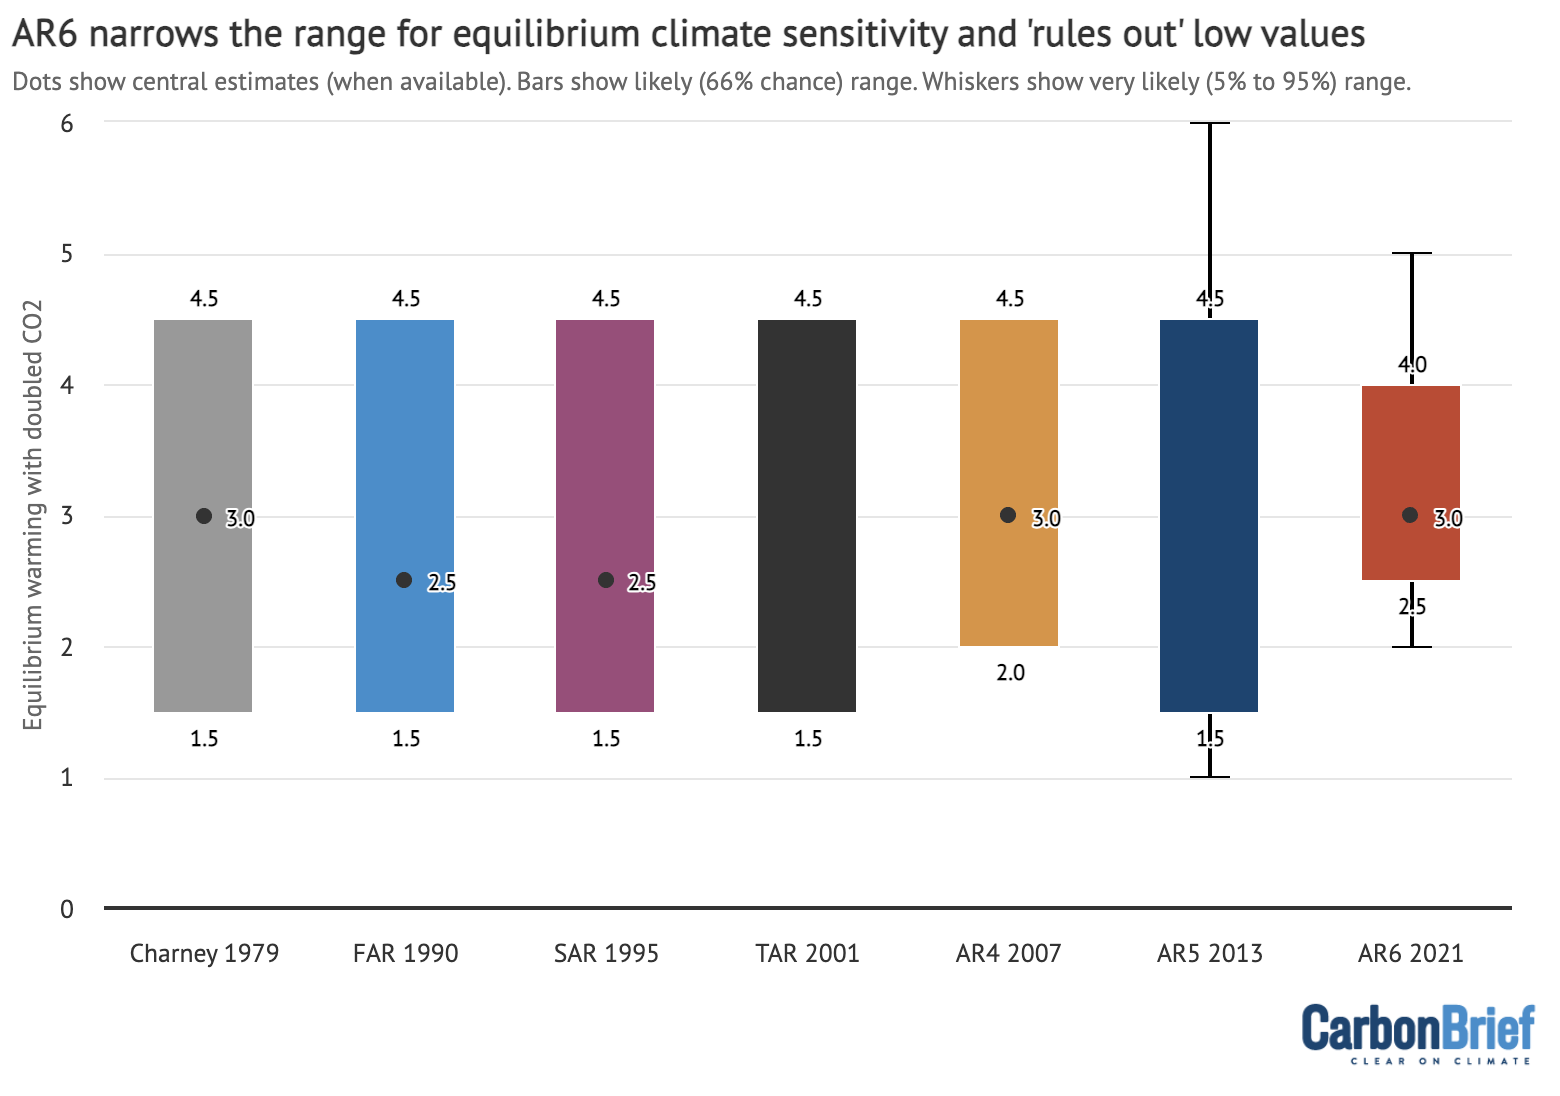 Estimates of ECS published in successive IPCC assessments since the Charney report in 1979. Dots show central estimates. The coloured bars show the likely range and the very likely range is given by whiskers. Chart by Carbon Brief